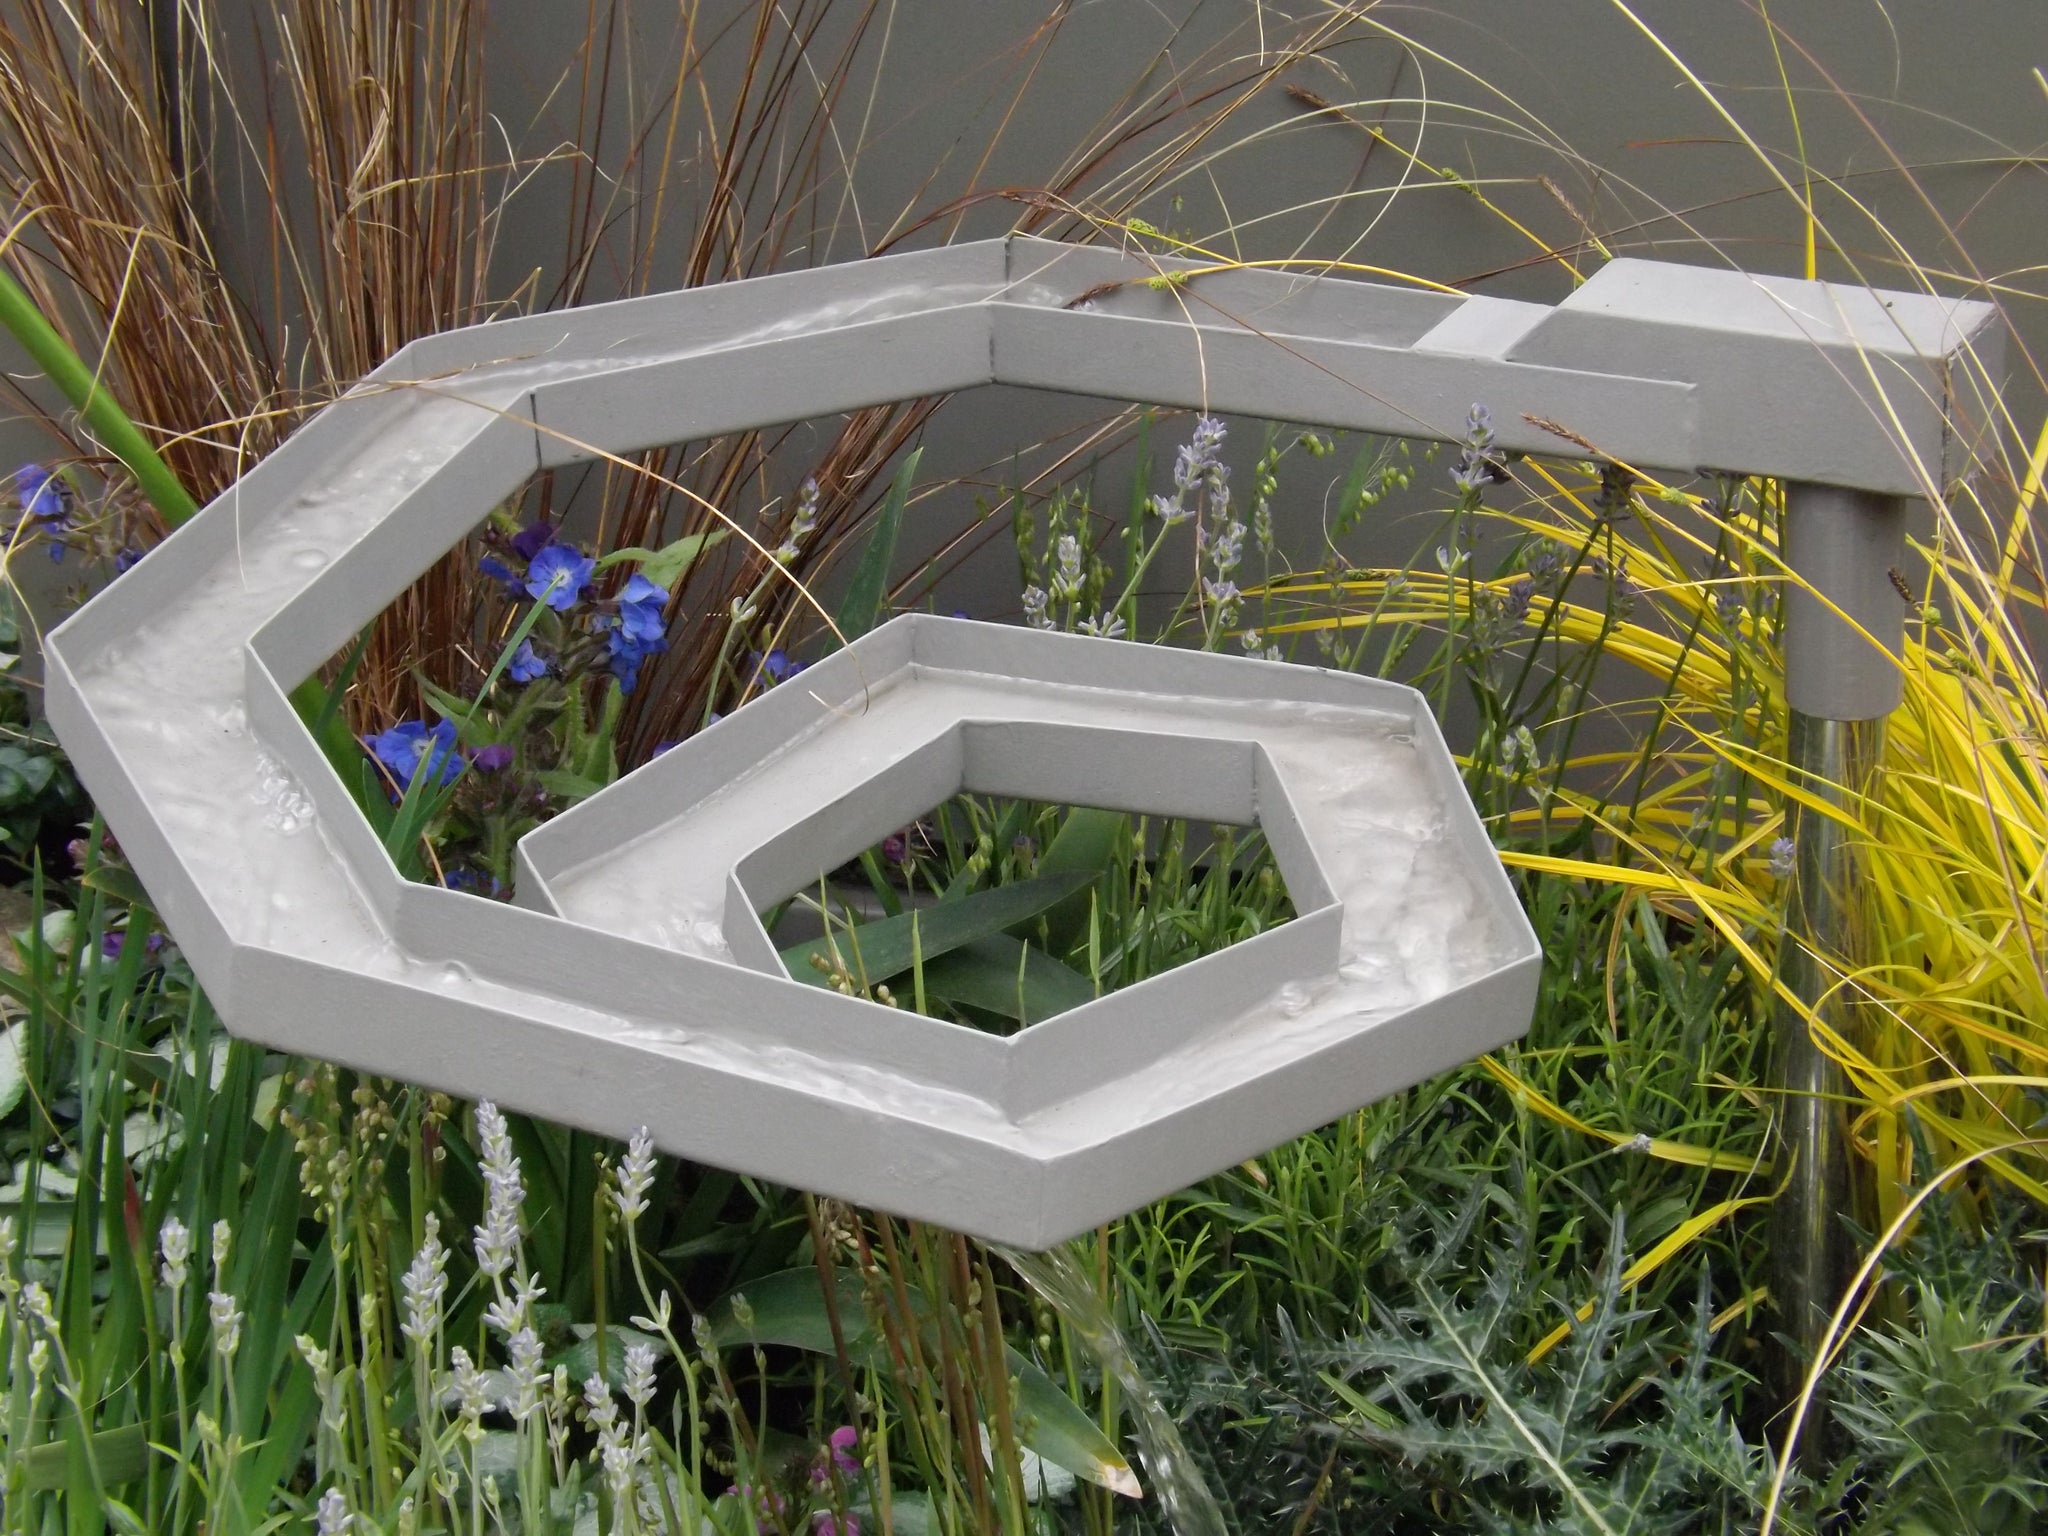 A spiral rill echoes the angular metal elsewhere in the garden